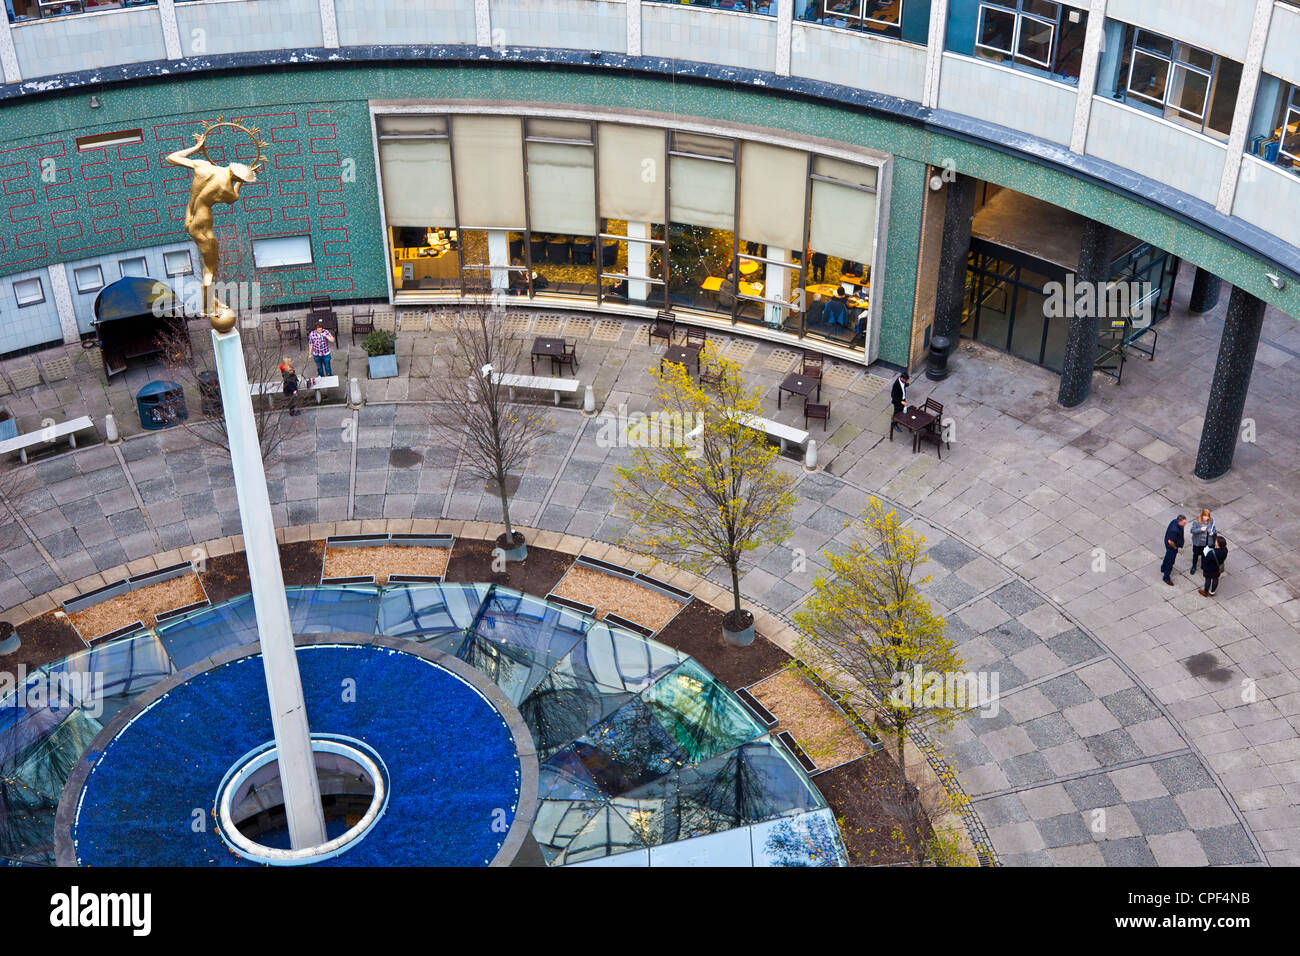 BBC Television Centre, Shepherds Bush, White City, London, looking down into central courtyard with statue of Helios. JMH6012 Stock Photo